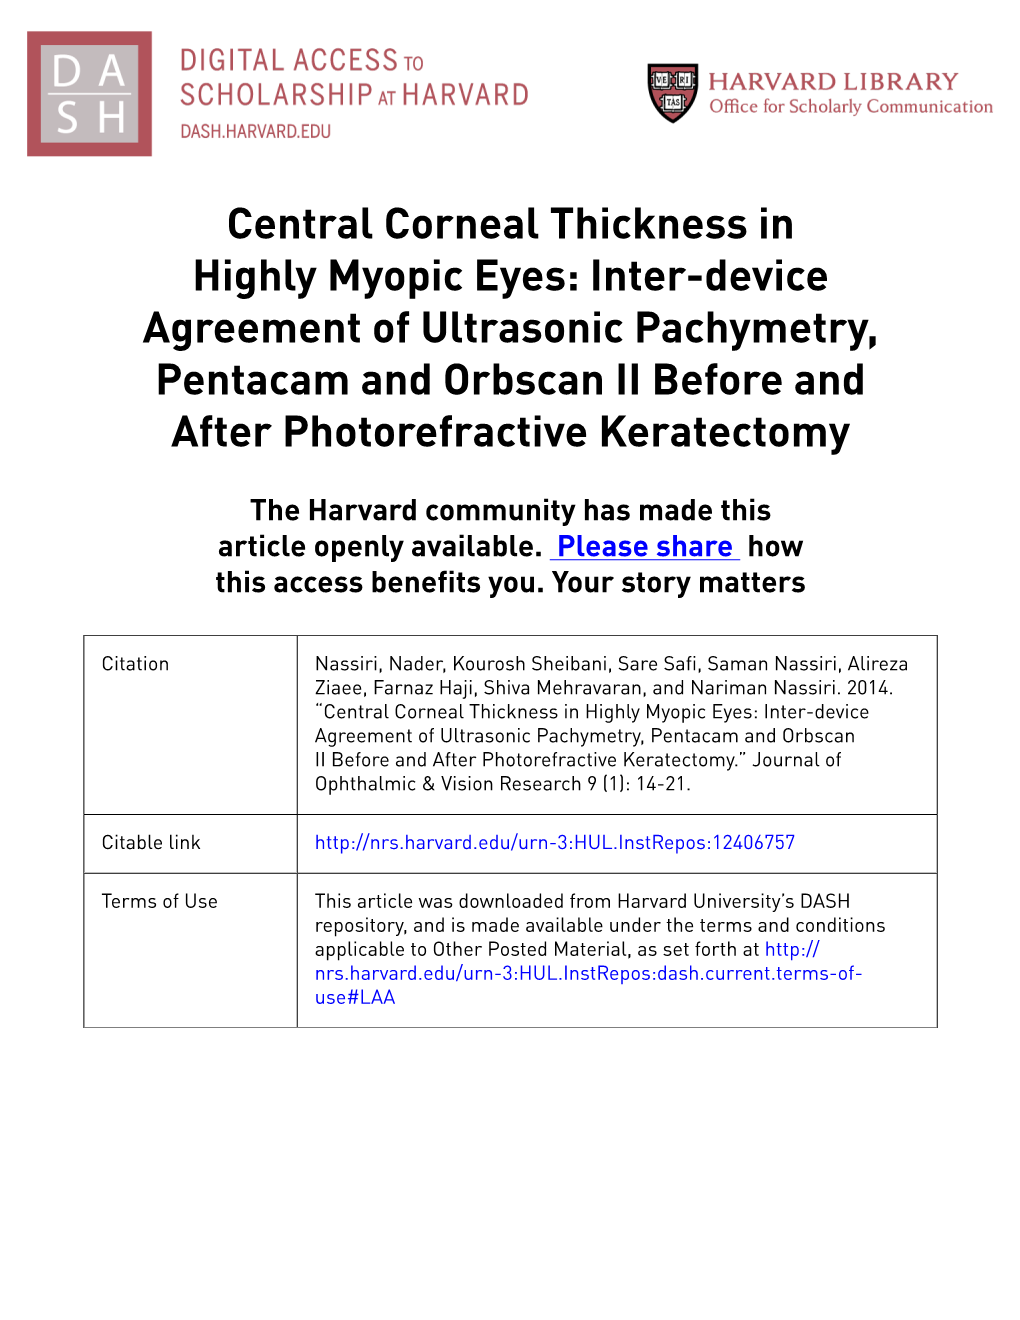 Central Corneal Thickness in Highly Myopic Eyes: Inter-Device Agreement of Ultrasonic Pachymetry, Pentacam and Orbscan II Before and After Photorefractive Keratectomy